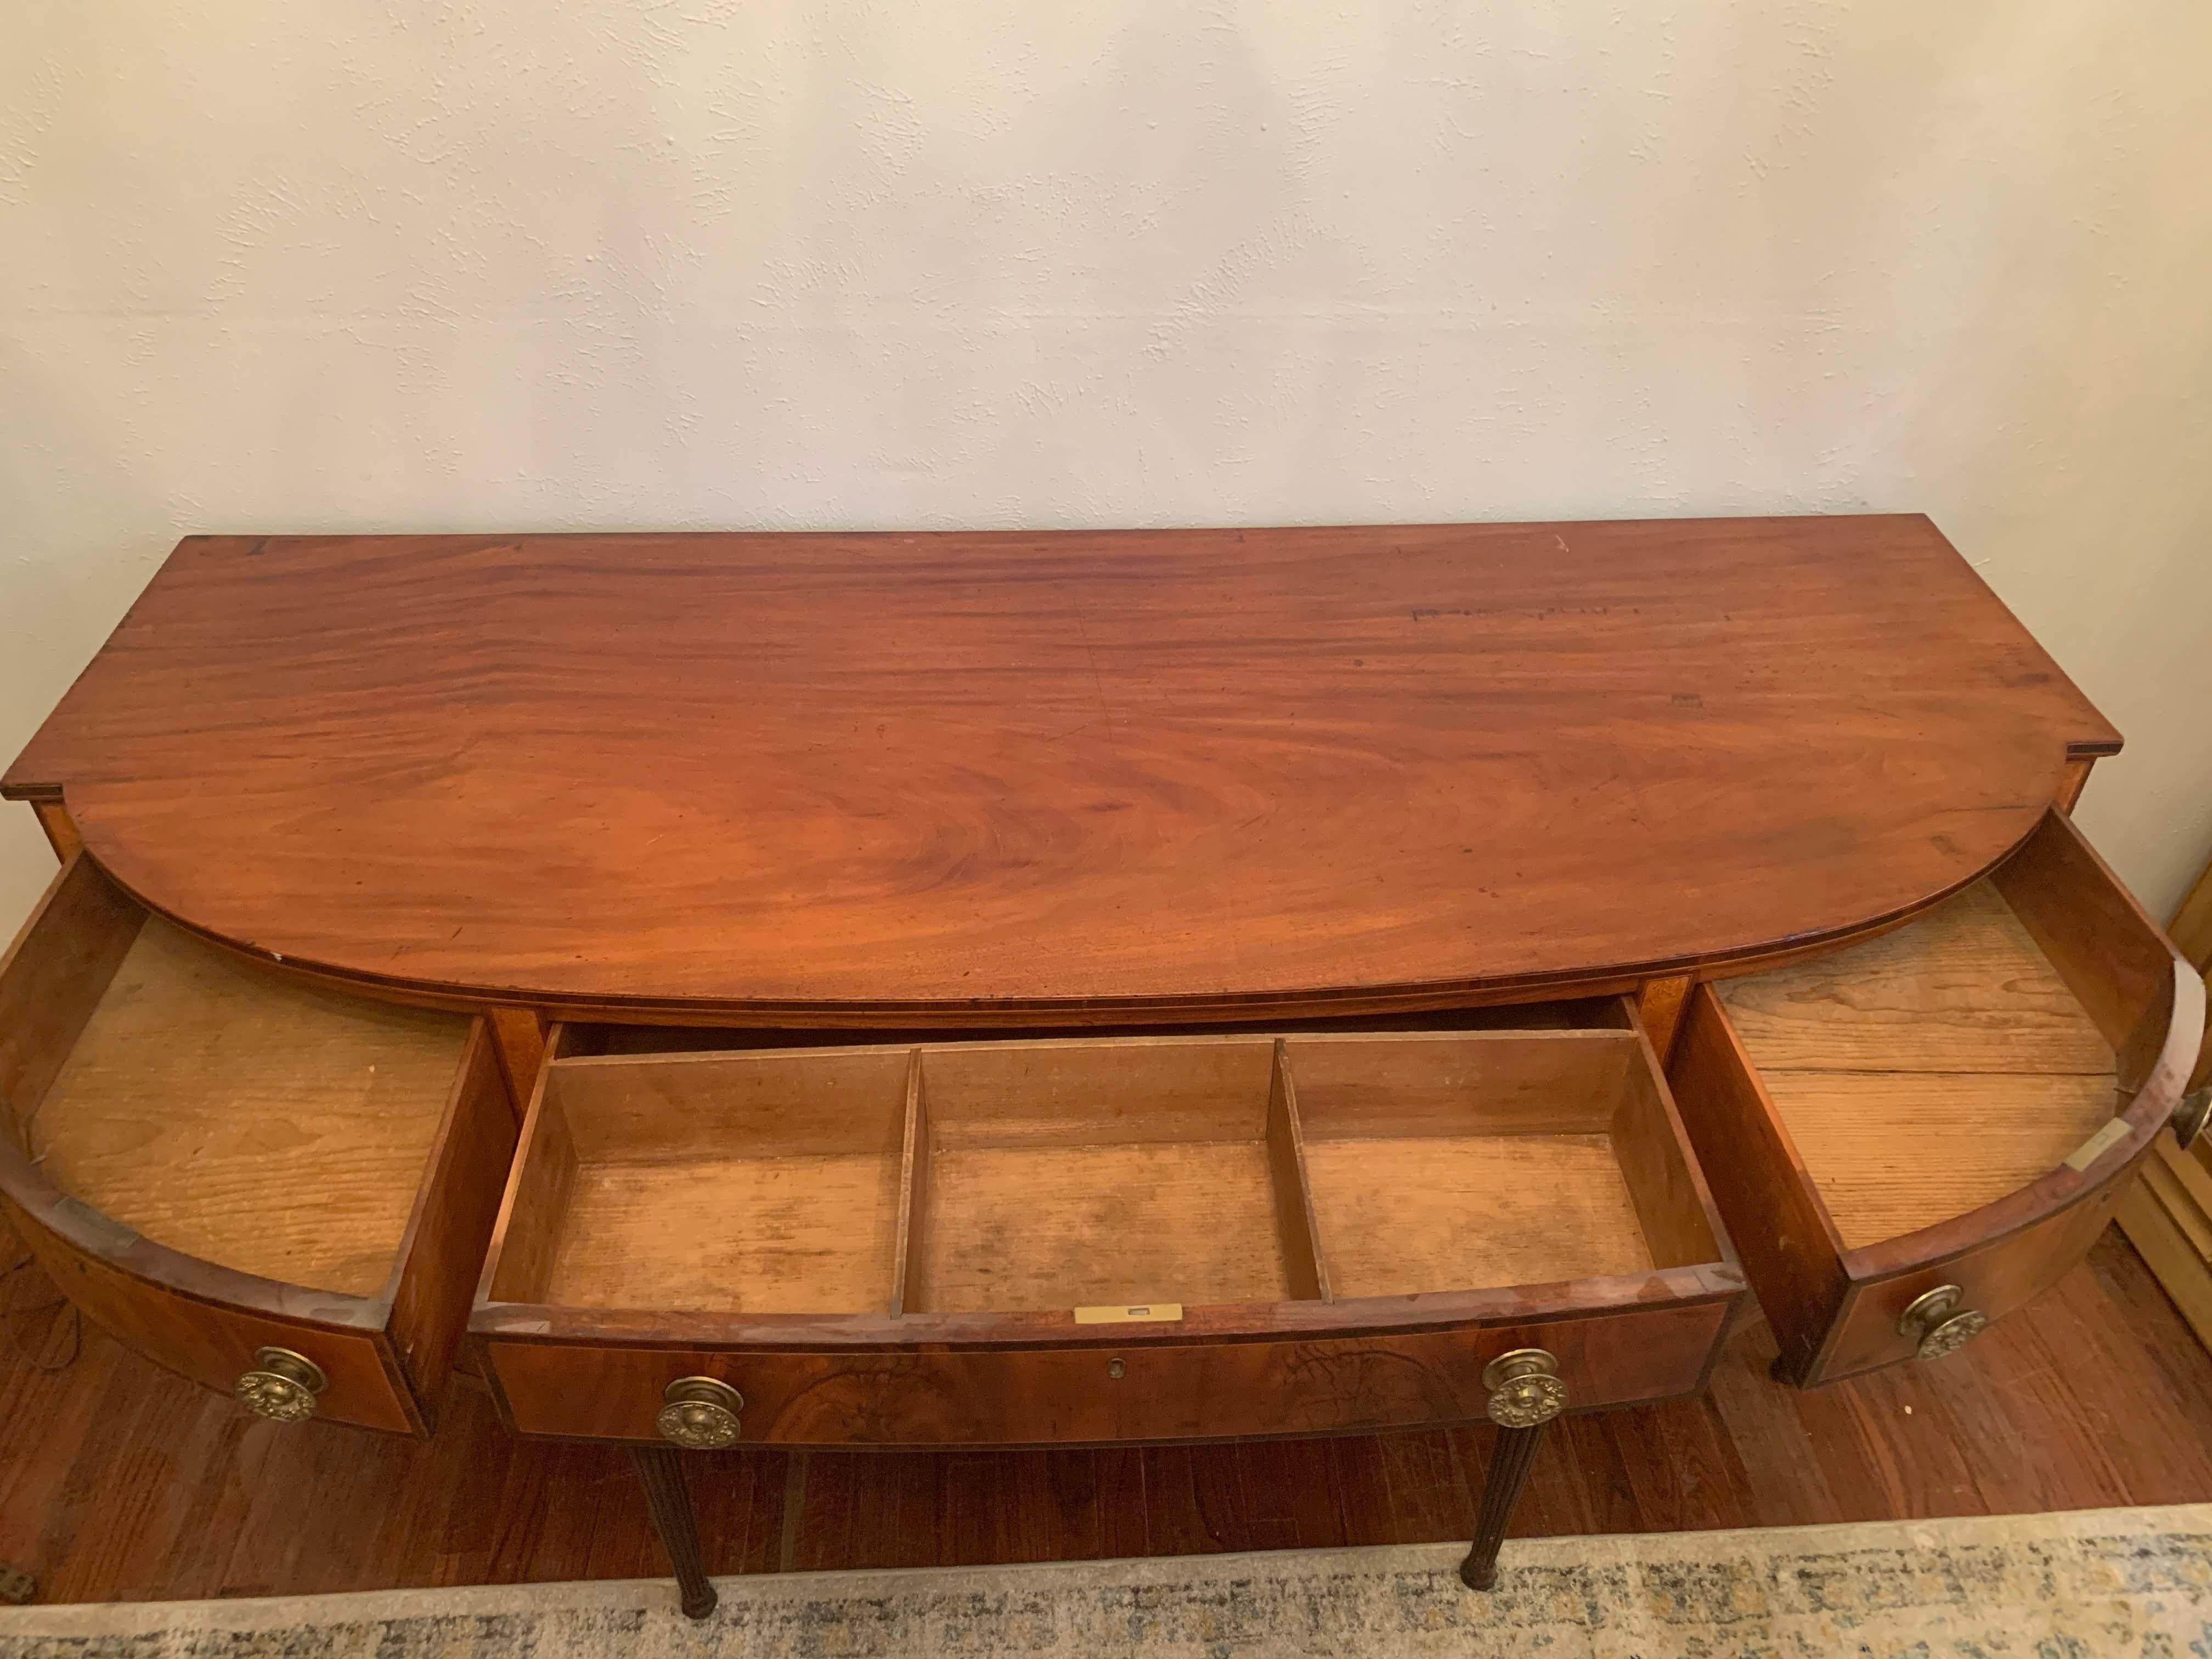 Beautiful American Sheraton/Federal 19th century bow front mahogany sideboard finely constructed with flowing grains of mahogany veneers throughout the front. Features bottle drawers, flanked by convex side drawers on tapered legs. Embellished with